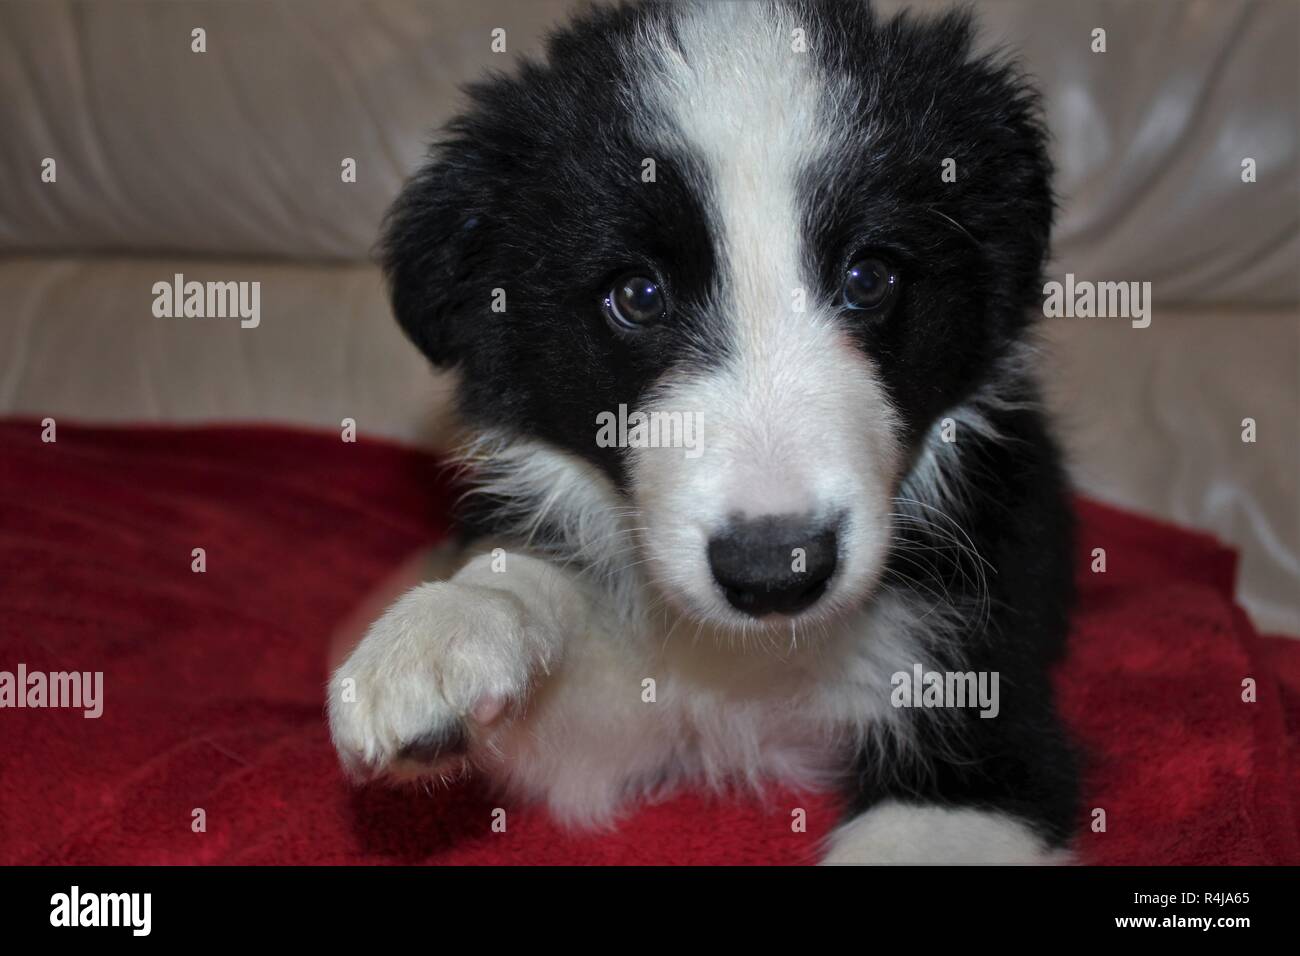 An 8 week old Pedigree, Border Collie puppy Stock Photo